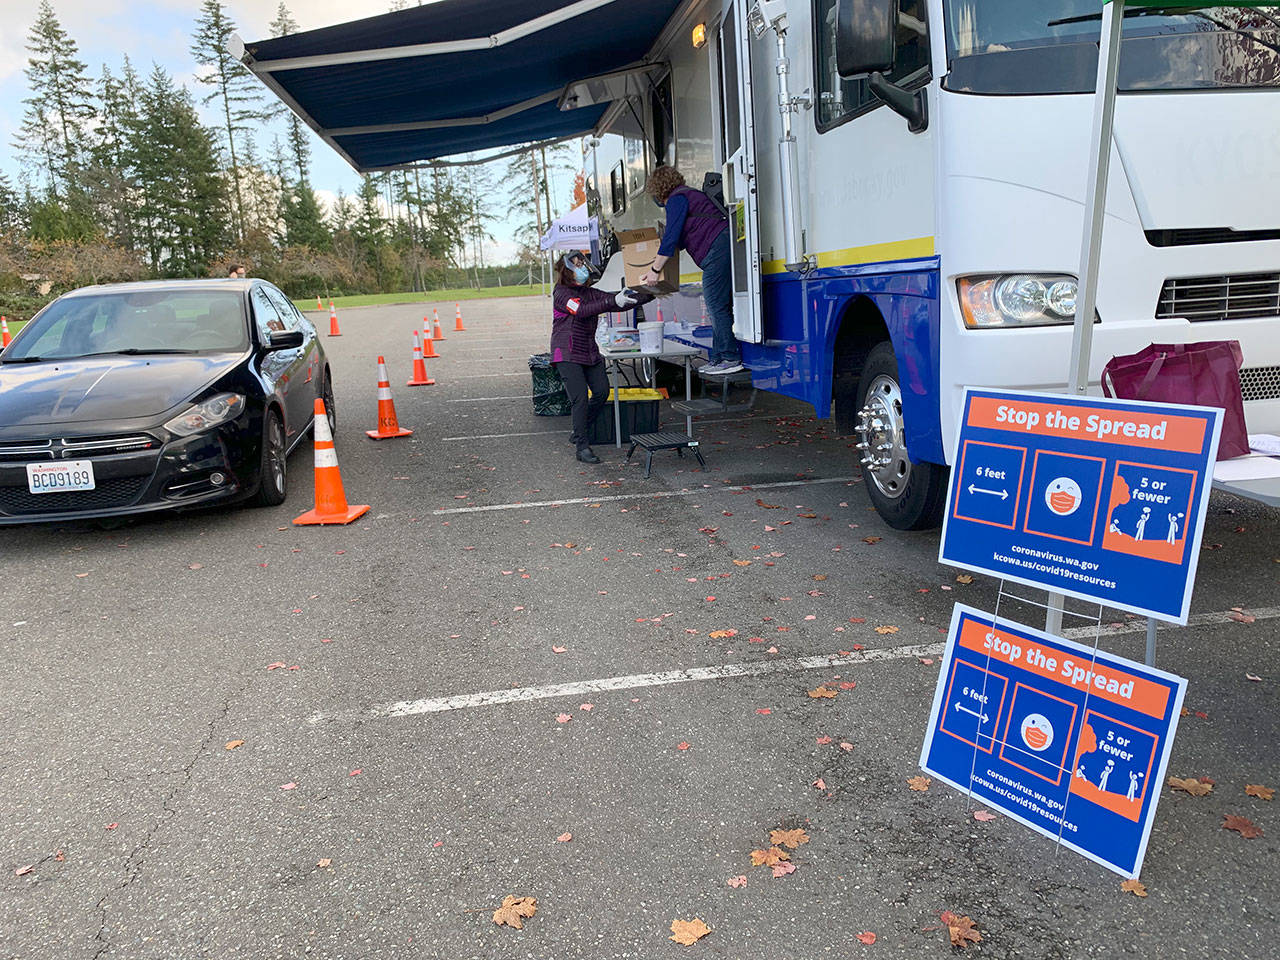 The COVID-19 mobile drive-through testing center is to be set up at Bremerton’s Pendergast Regional Park for reservation-only testing on Mondays, Thursdays and Saturdays. The site will be open from 10 a.m. to 3 p.m., beginning Monday, Oct. 26. (Bob Smith | Kitsap Daily News)